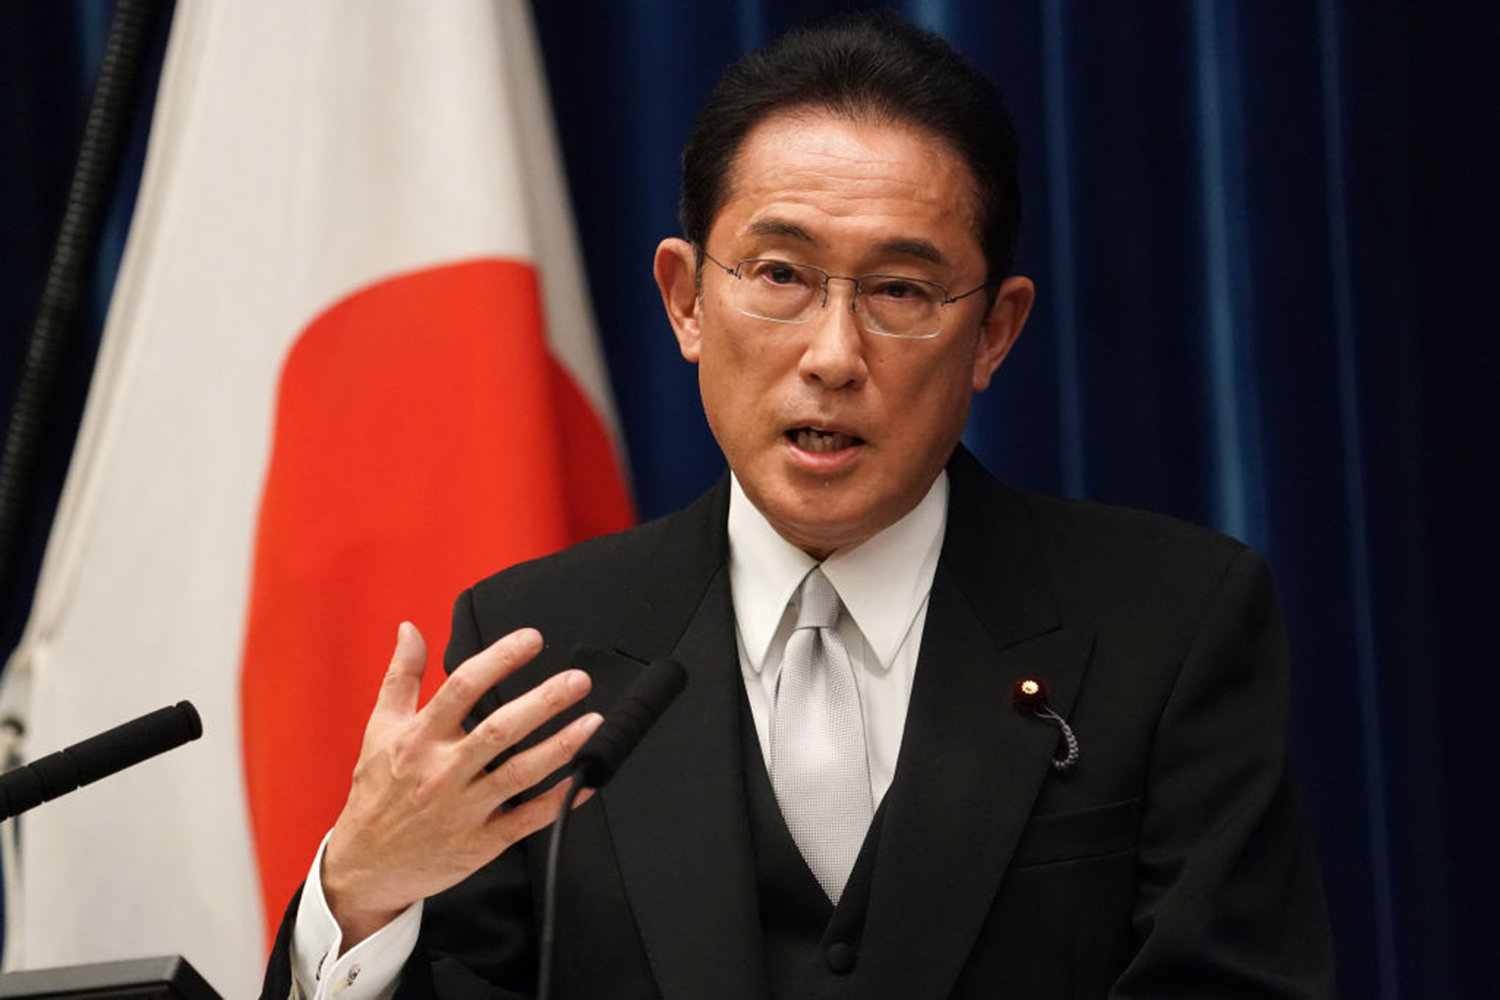 Fumio Kishida, Japan's prime minister, speaks during a news conference at the prime minister's official residence on Oct. 4, 2021 in Tokyo, Japan. Fumio Kishida, president of Japan's ruling party Liberal Democratic Party was elected as the nation's 100th prime minister on Oct. 4, 2021. (Toru Hanai - Pool/Getty Images/TNS)